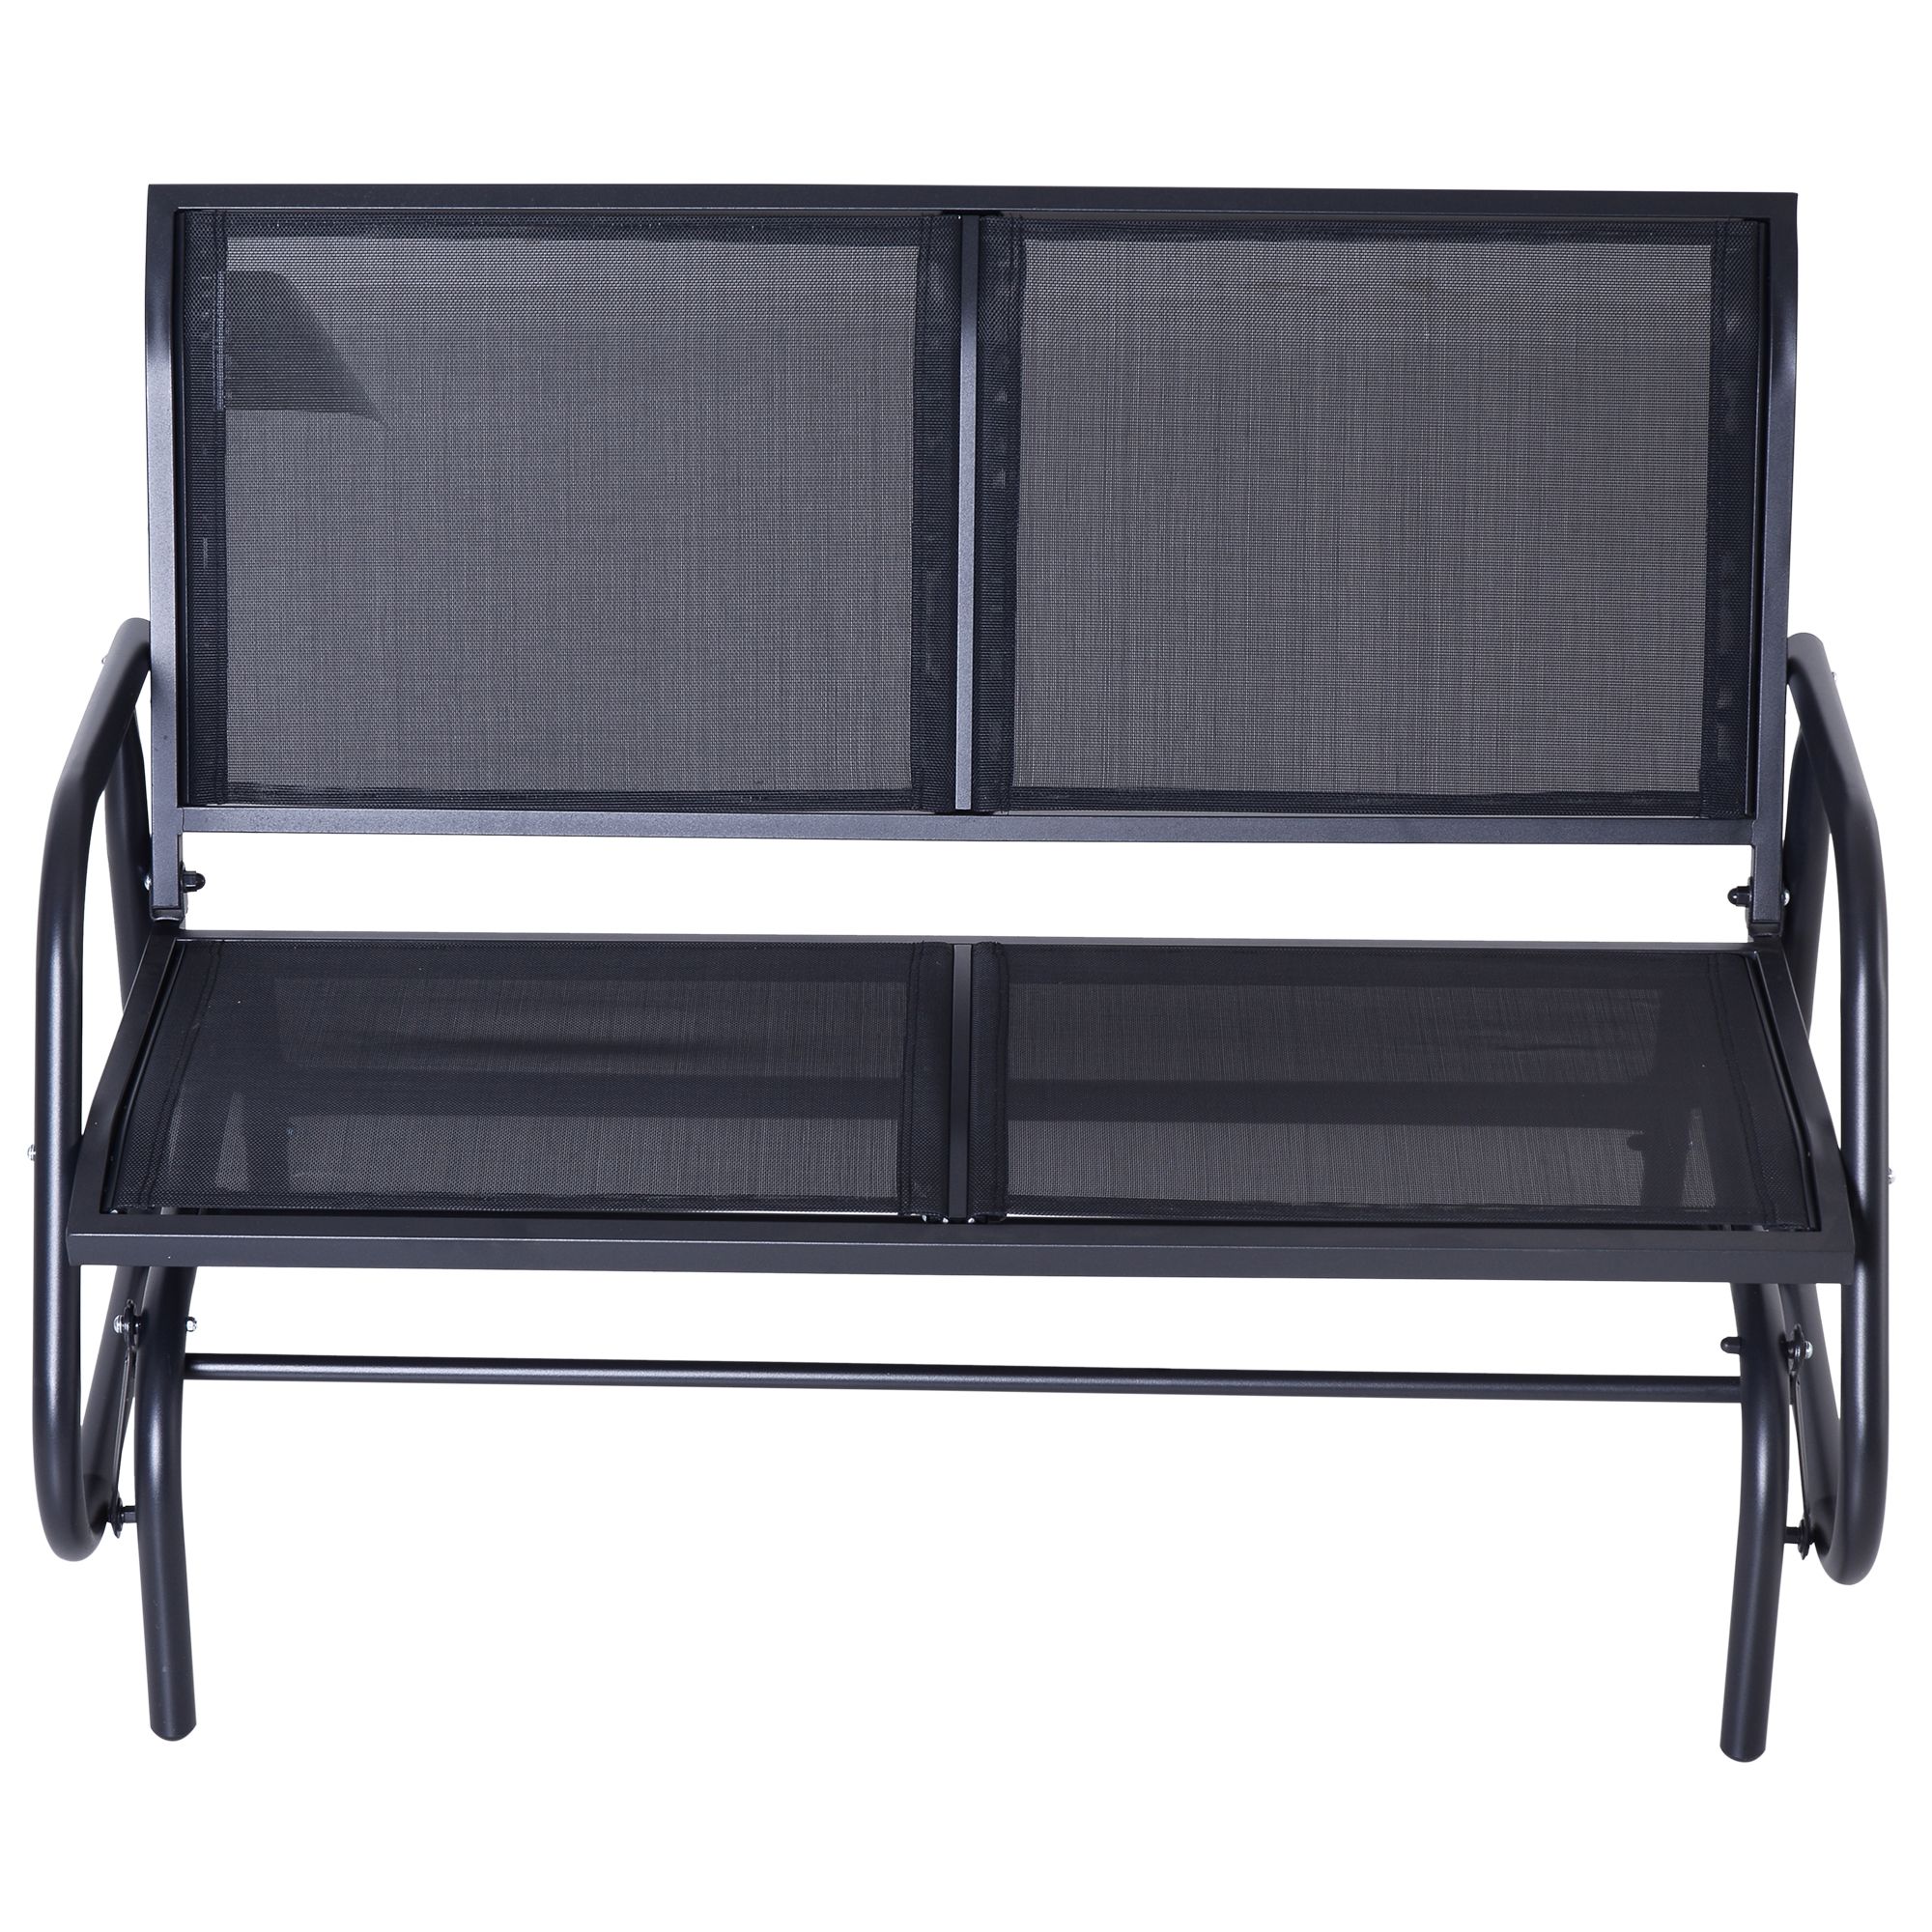 Outsunny Steel Sling Fabric Outdoor Double Glider Rocking Regarding Widely Used Black Outdoor Durable Steel Frame Patio Swing Glider Bench Chairs (View 6 of 25)